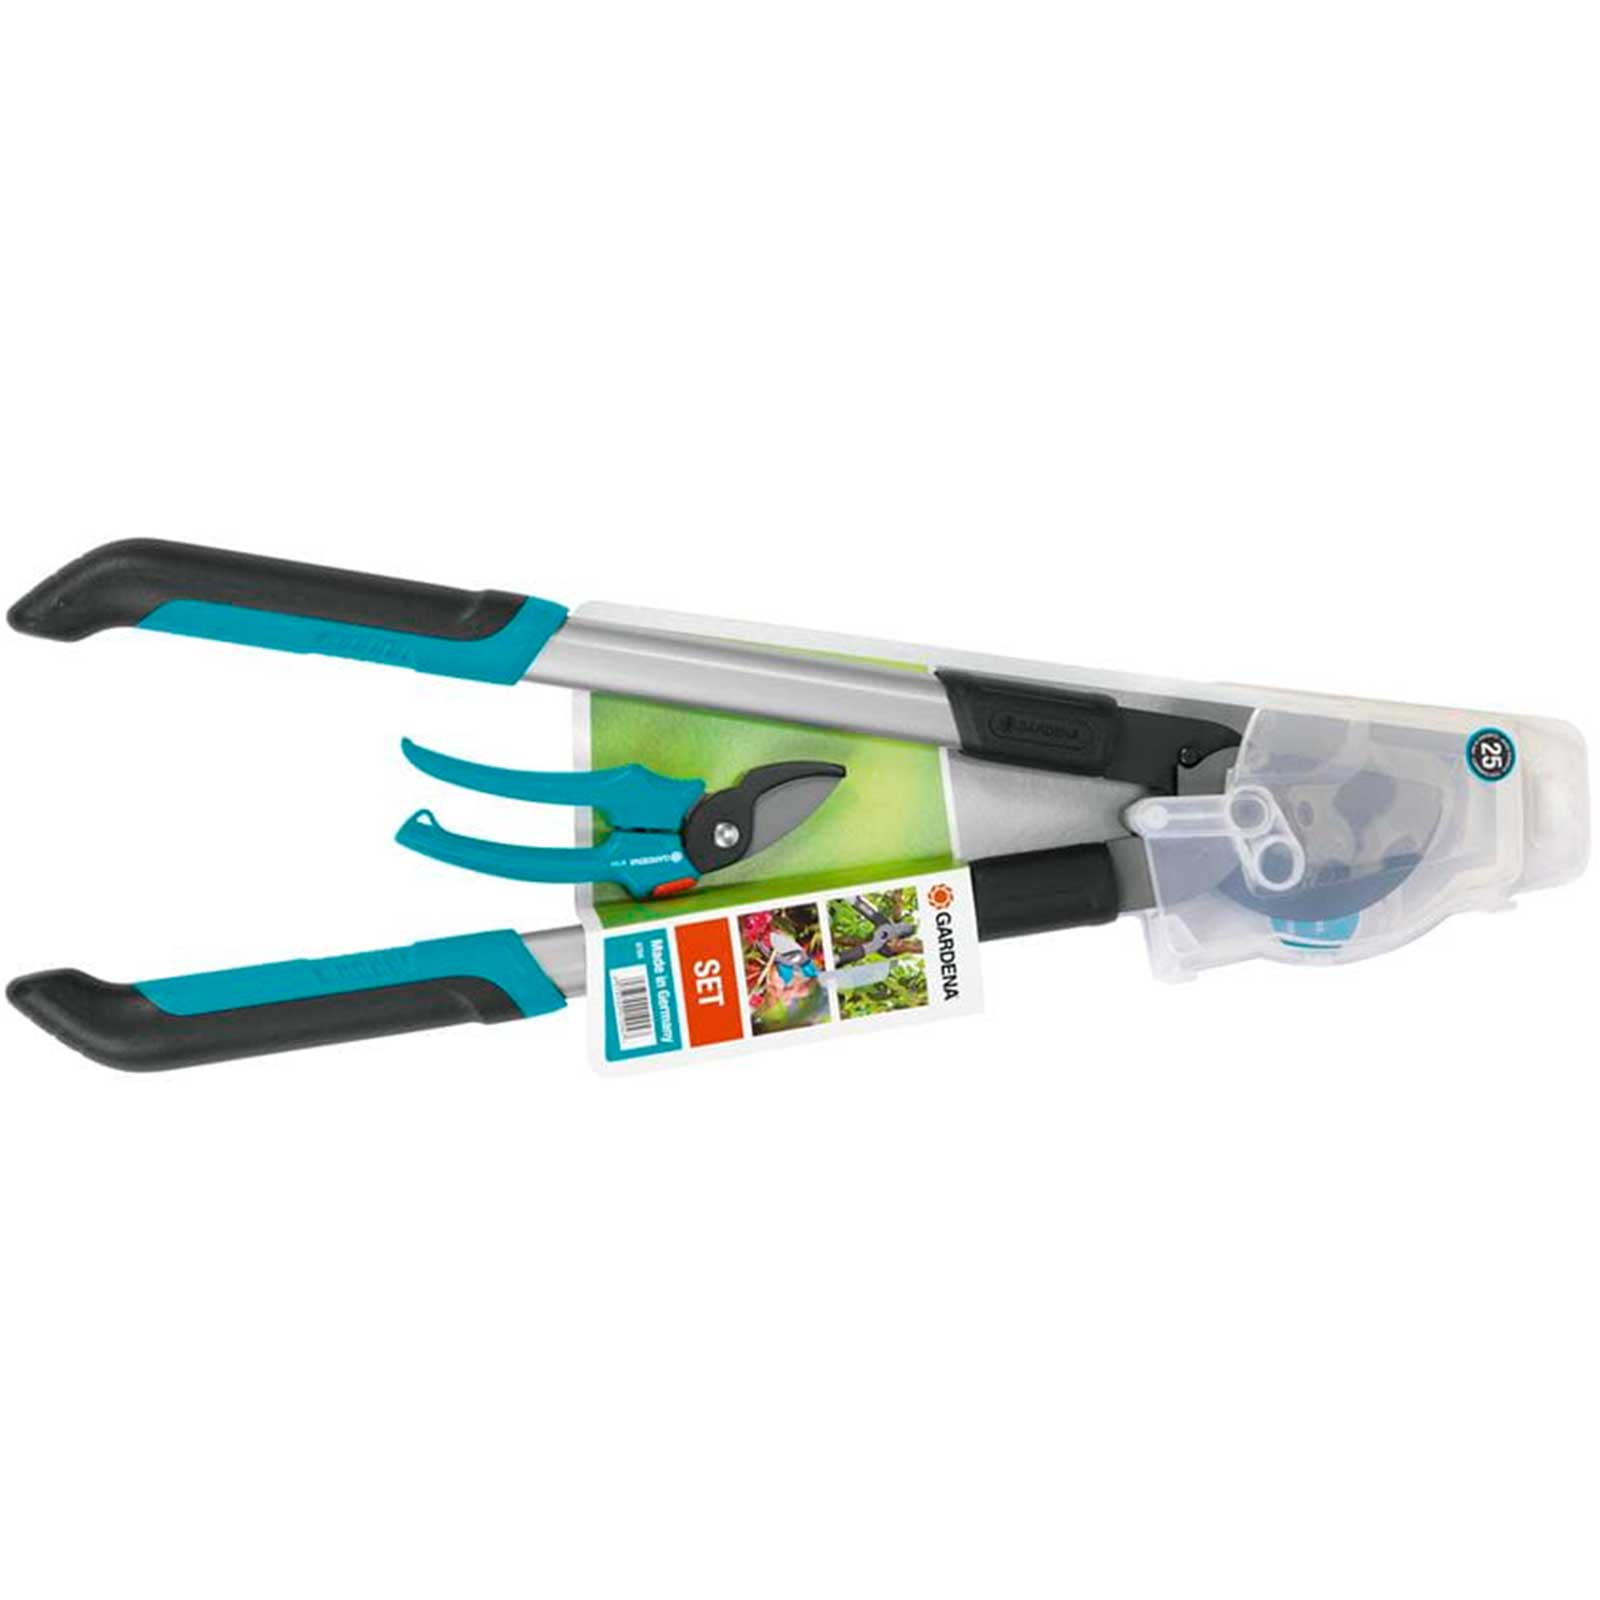 Image of Gardena EasyCut Loppers and Bypass Secateur Set